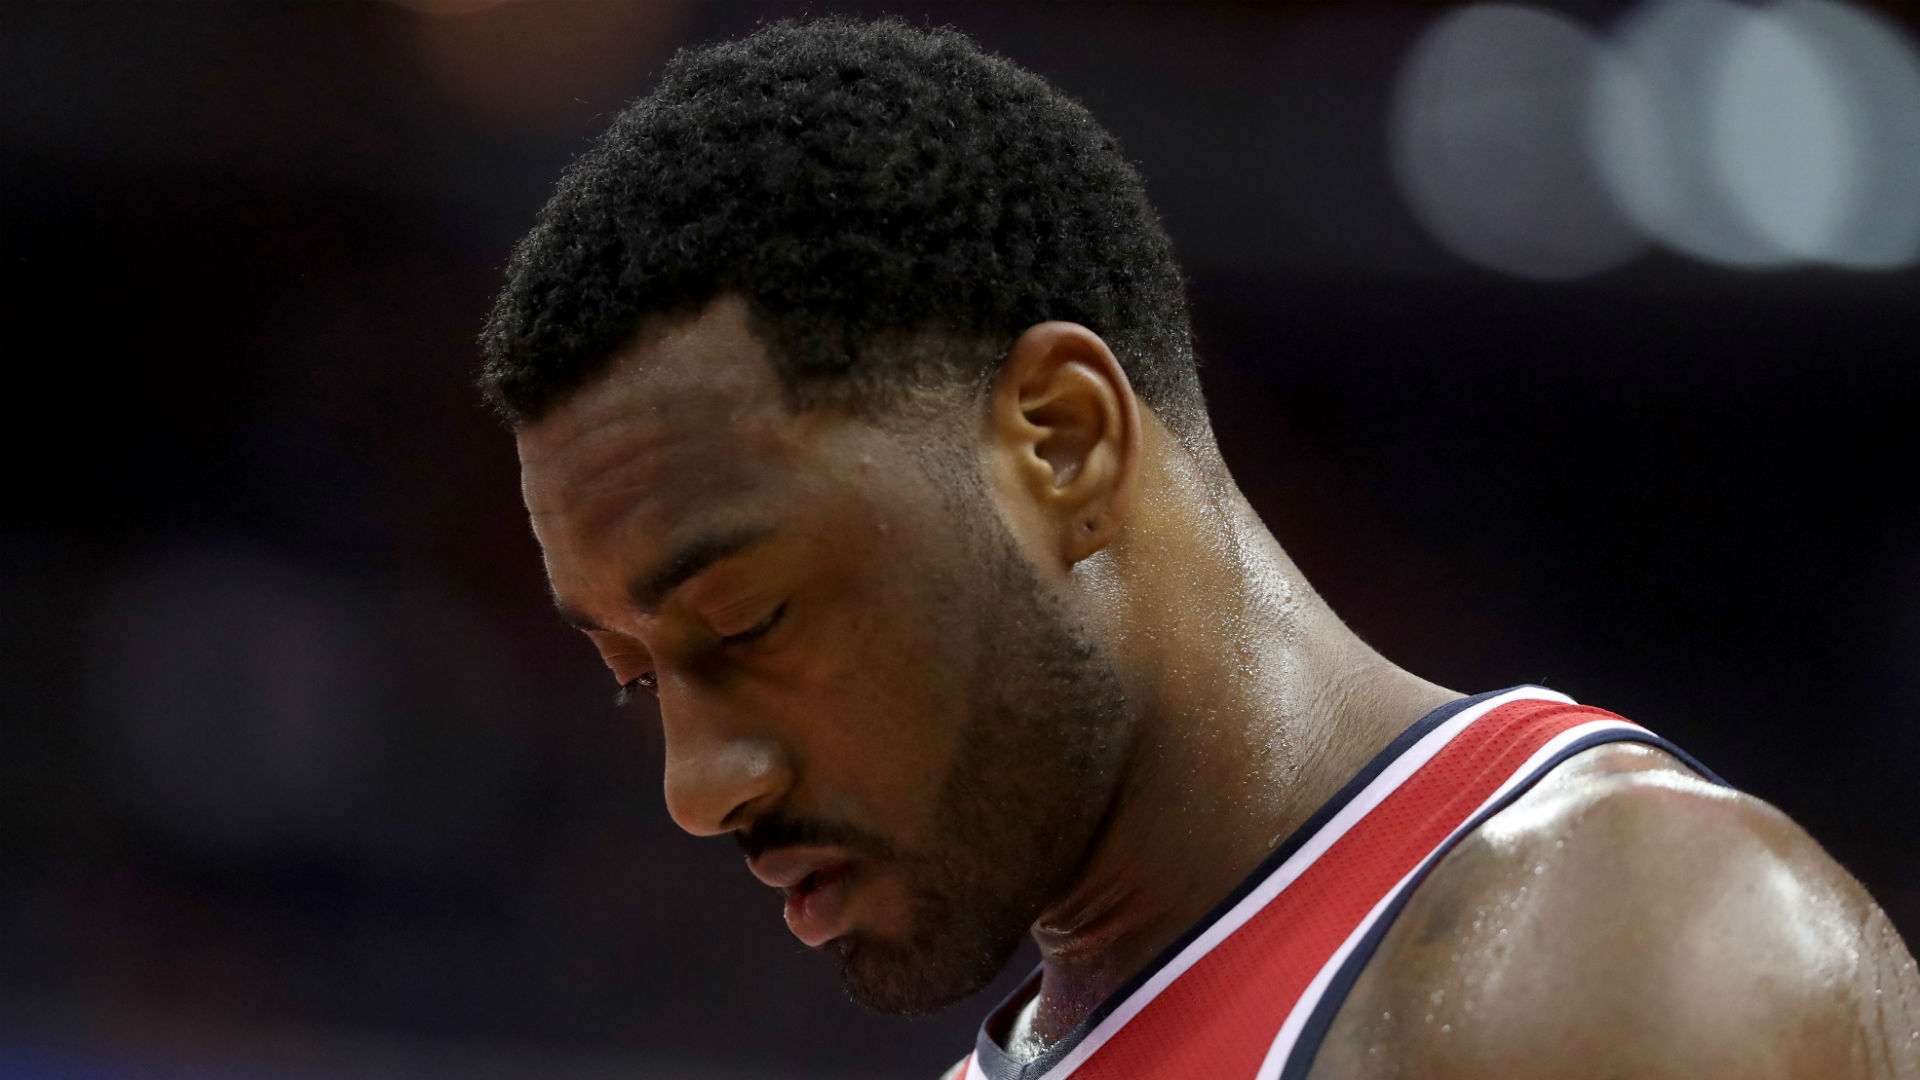 John Wall said "he couldn't run" in the Washington Wizards' loss to the Cleveland Cavaliers, in which he scored just one point.